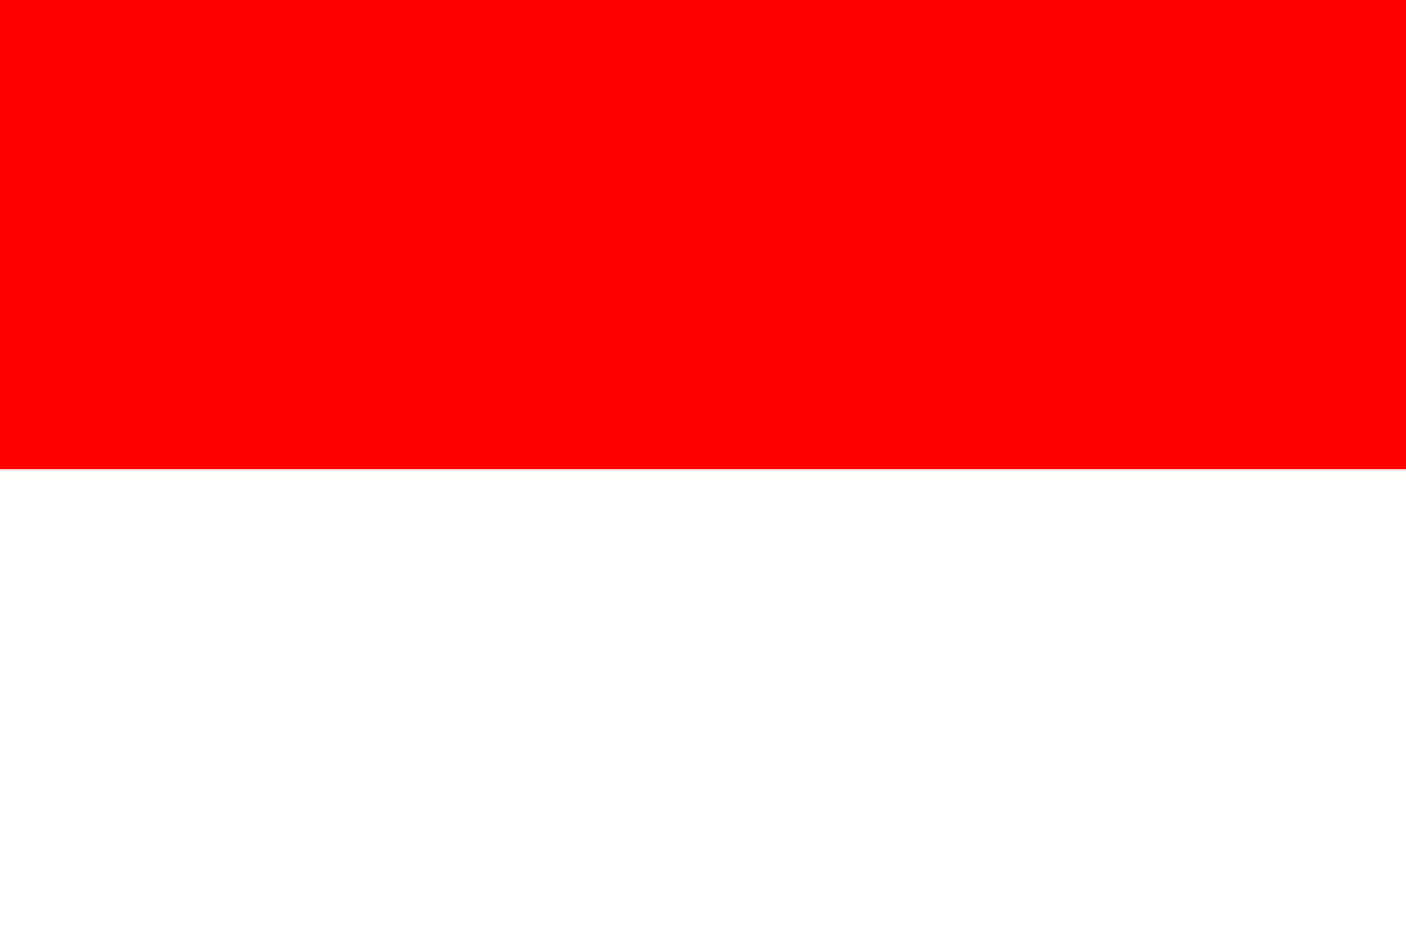 Free Indonesia Flag Documents: PDF, DOC, DOCX, HTML & More!